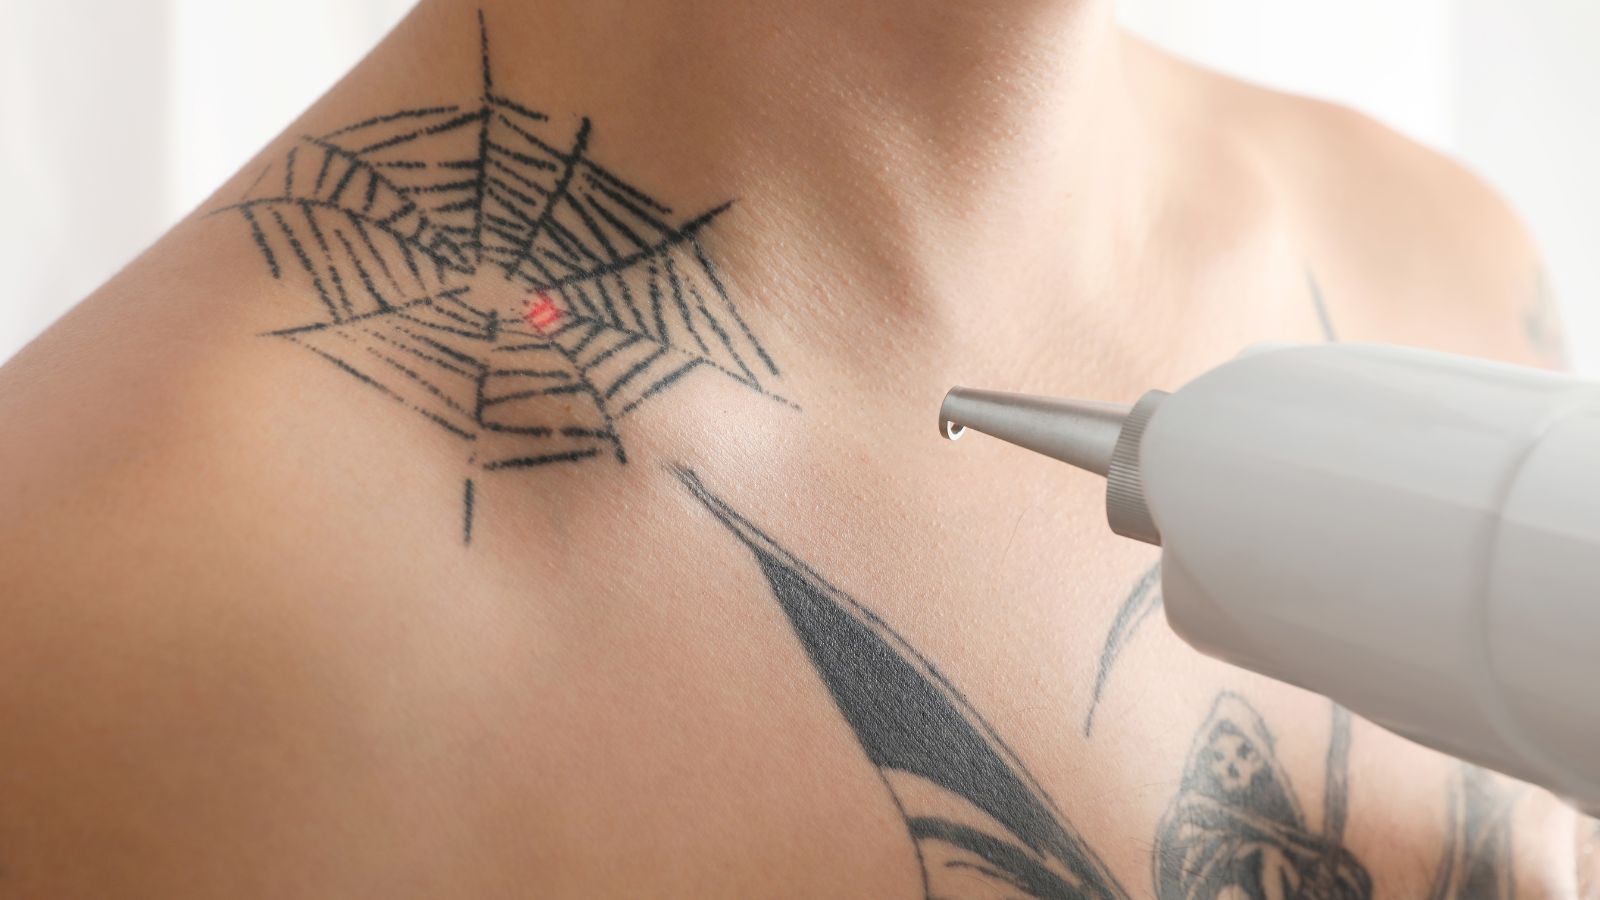 A Spider web tattoo in the shoulder.